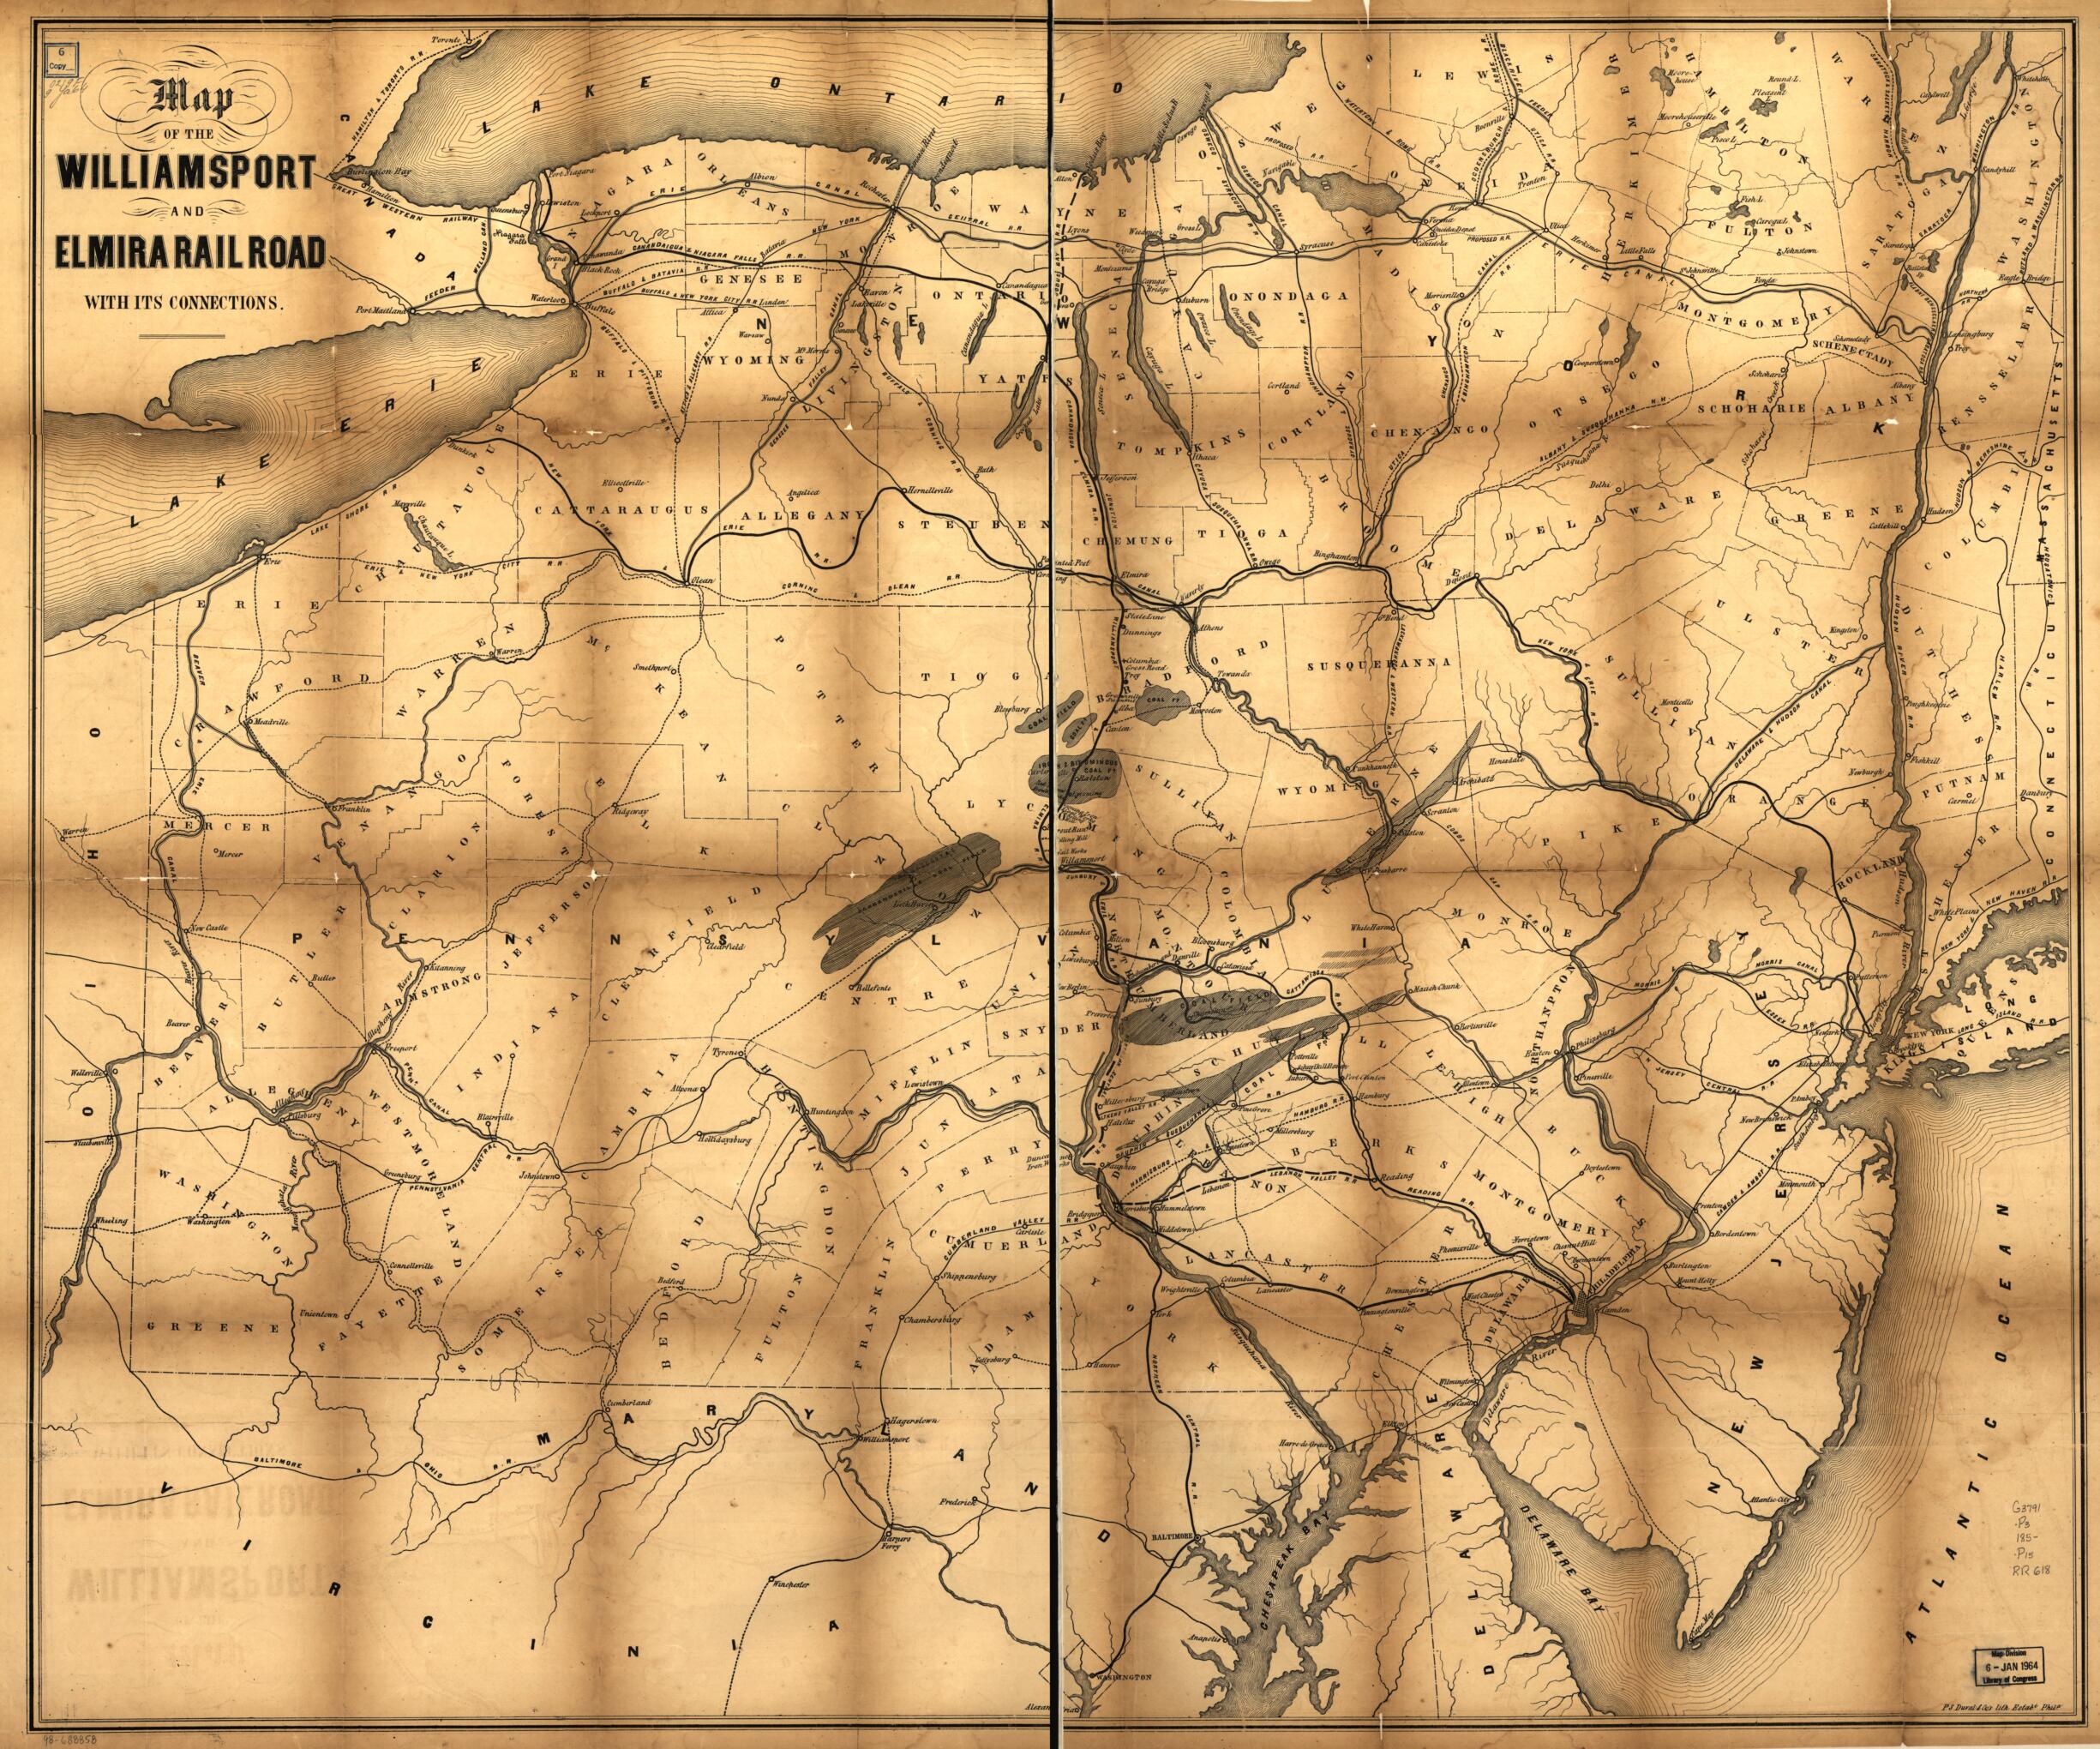 This old map of Map of the Williamsport and Elmira Railroad With Its Connections from 1850 was created by  P.S. Duval &amp; Co,  Williamsport and Elmira Railroad Company in 1850